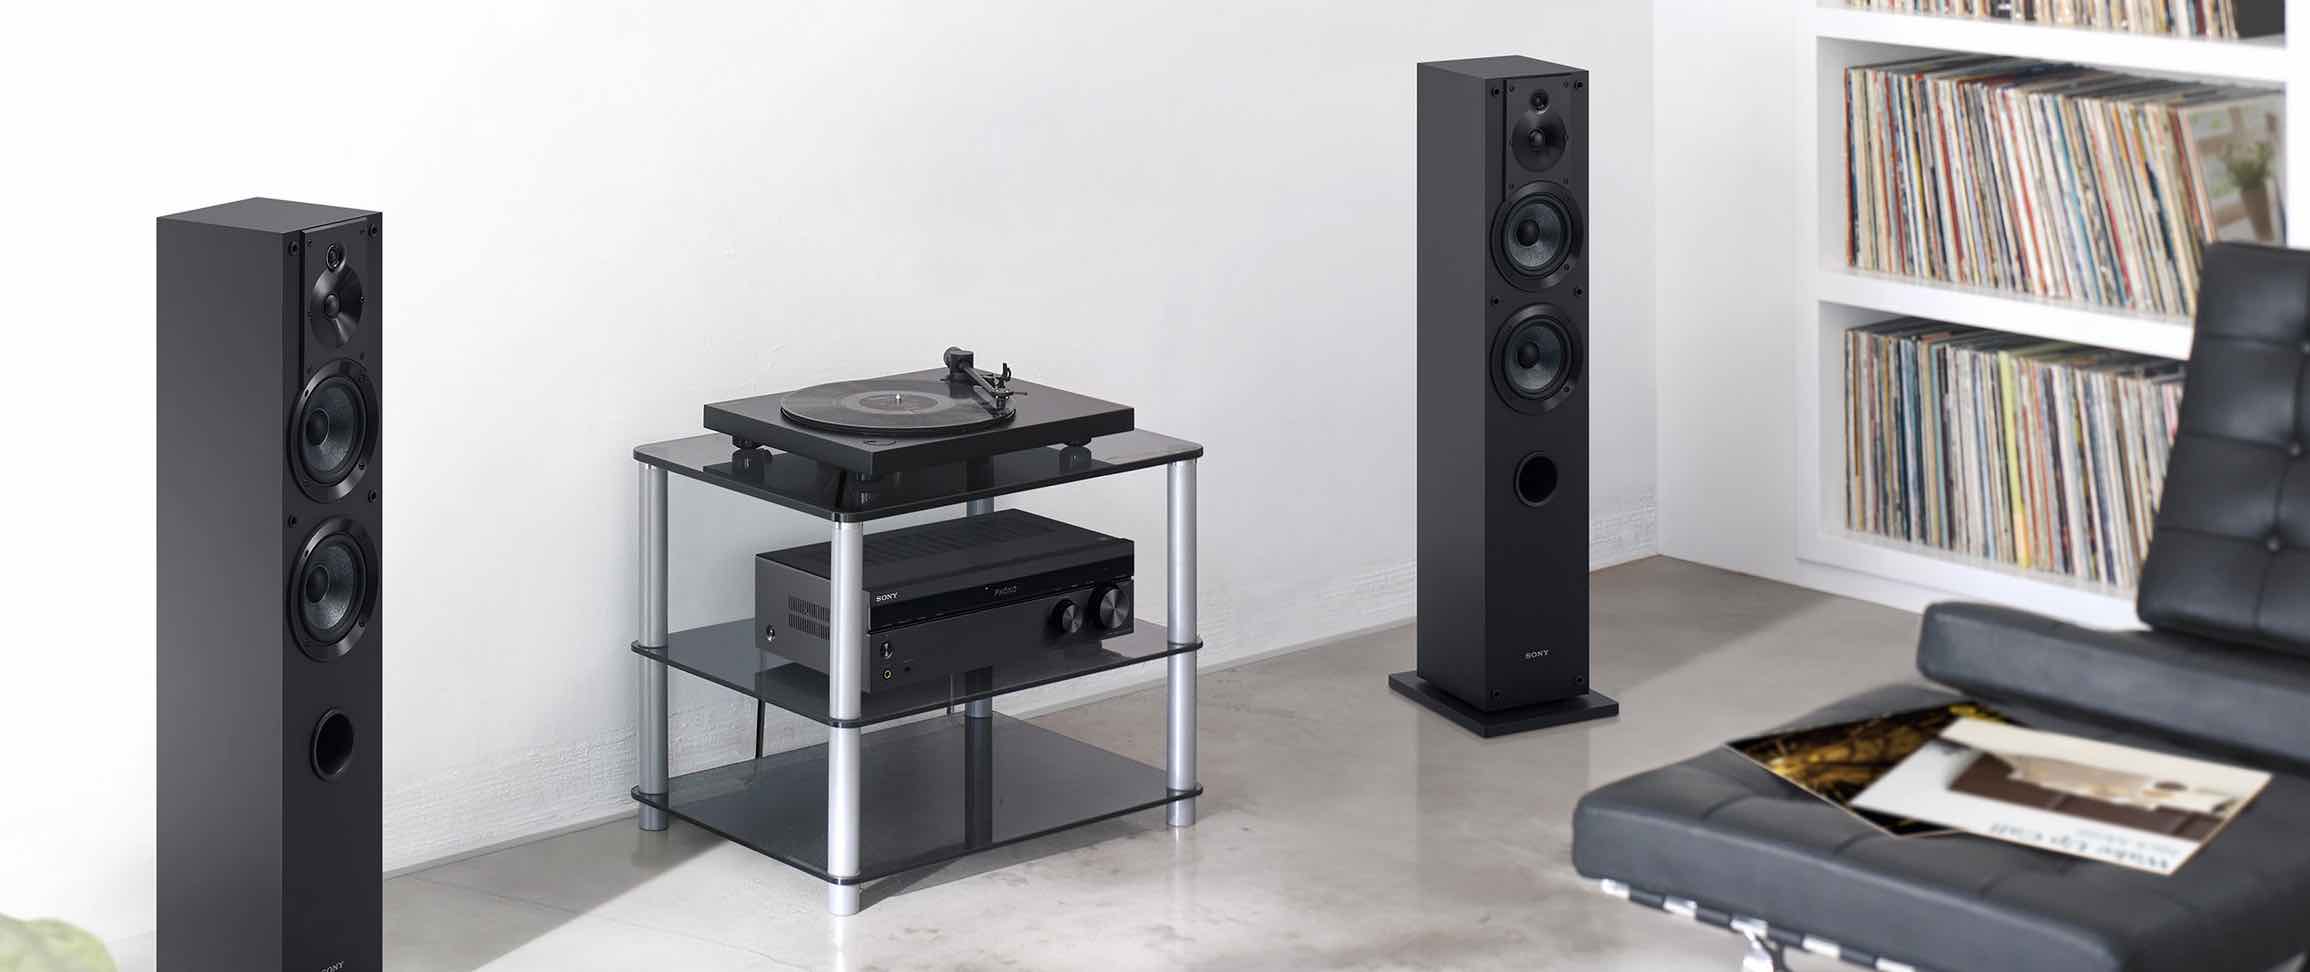 turn table speakers home theatre